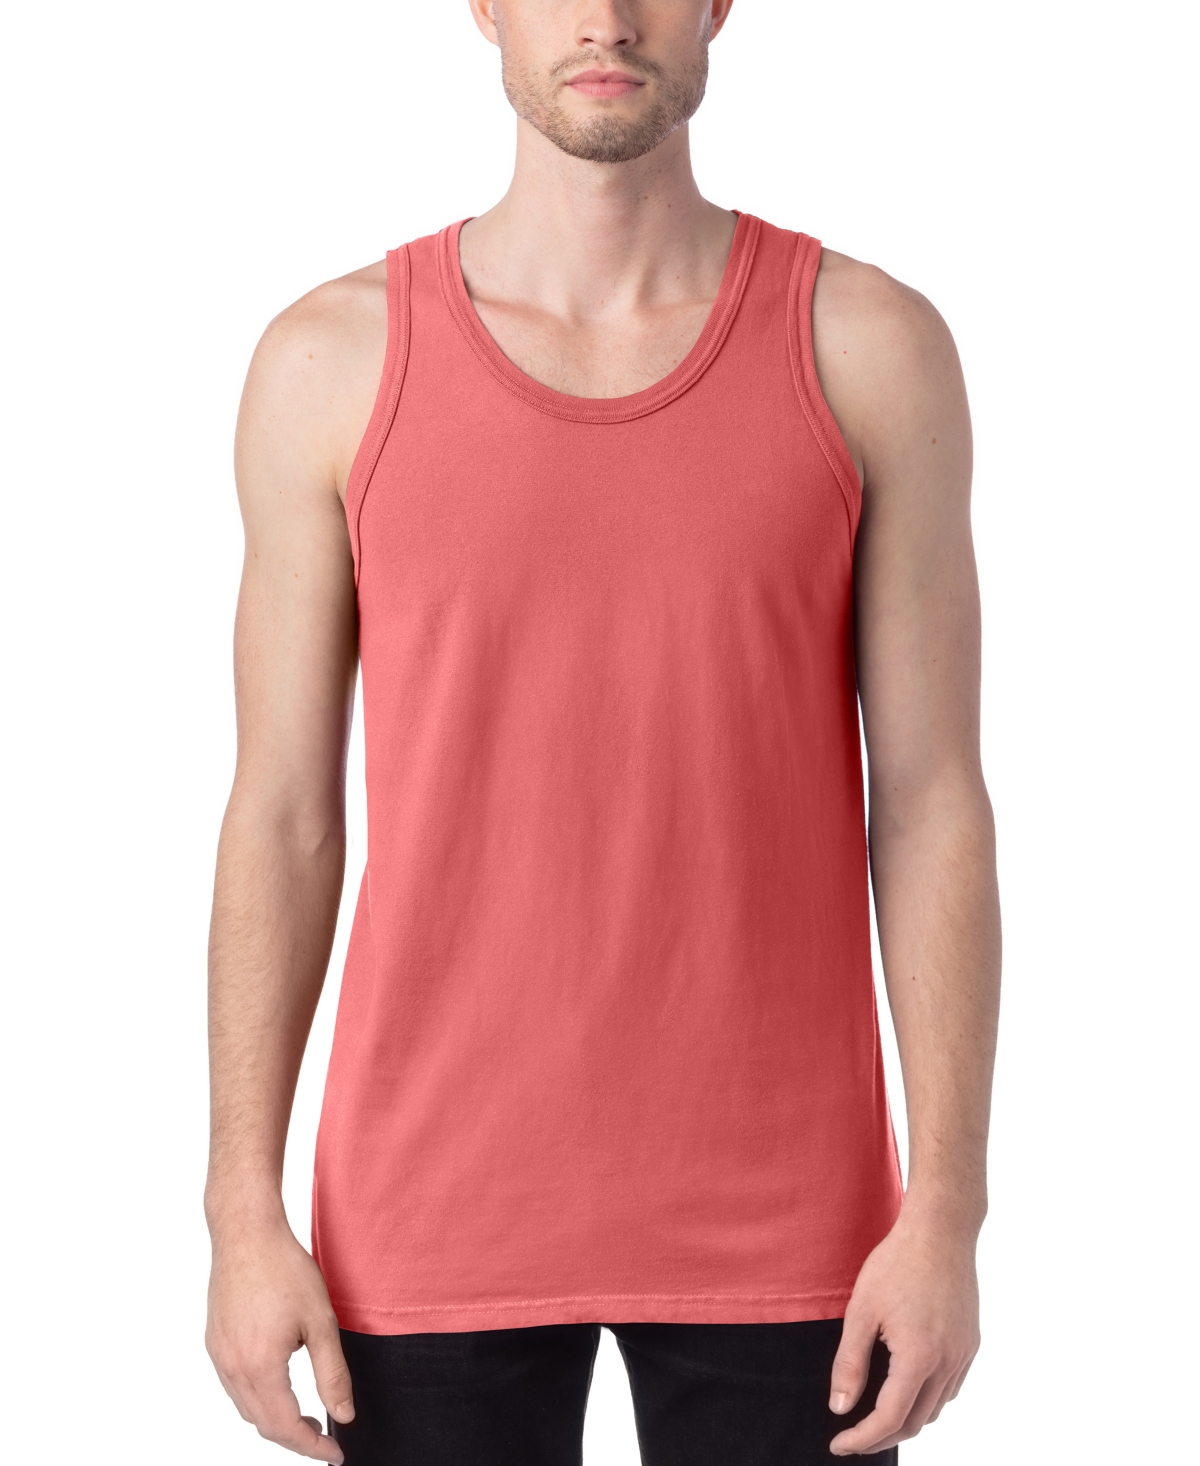 Hanes Unisex Garment Dyed Cotton Tank Top In Red